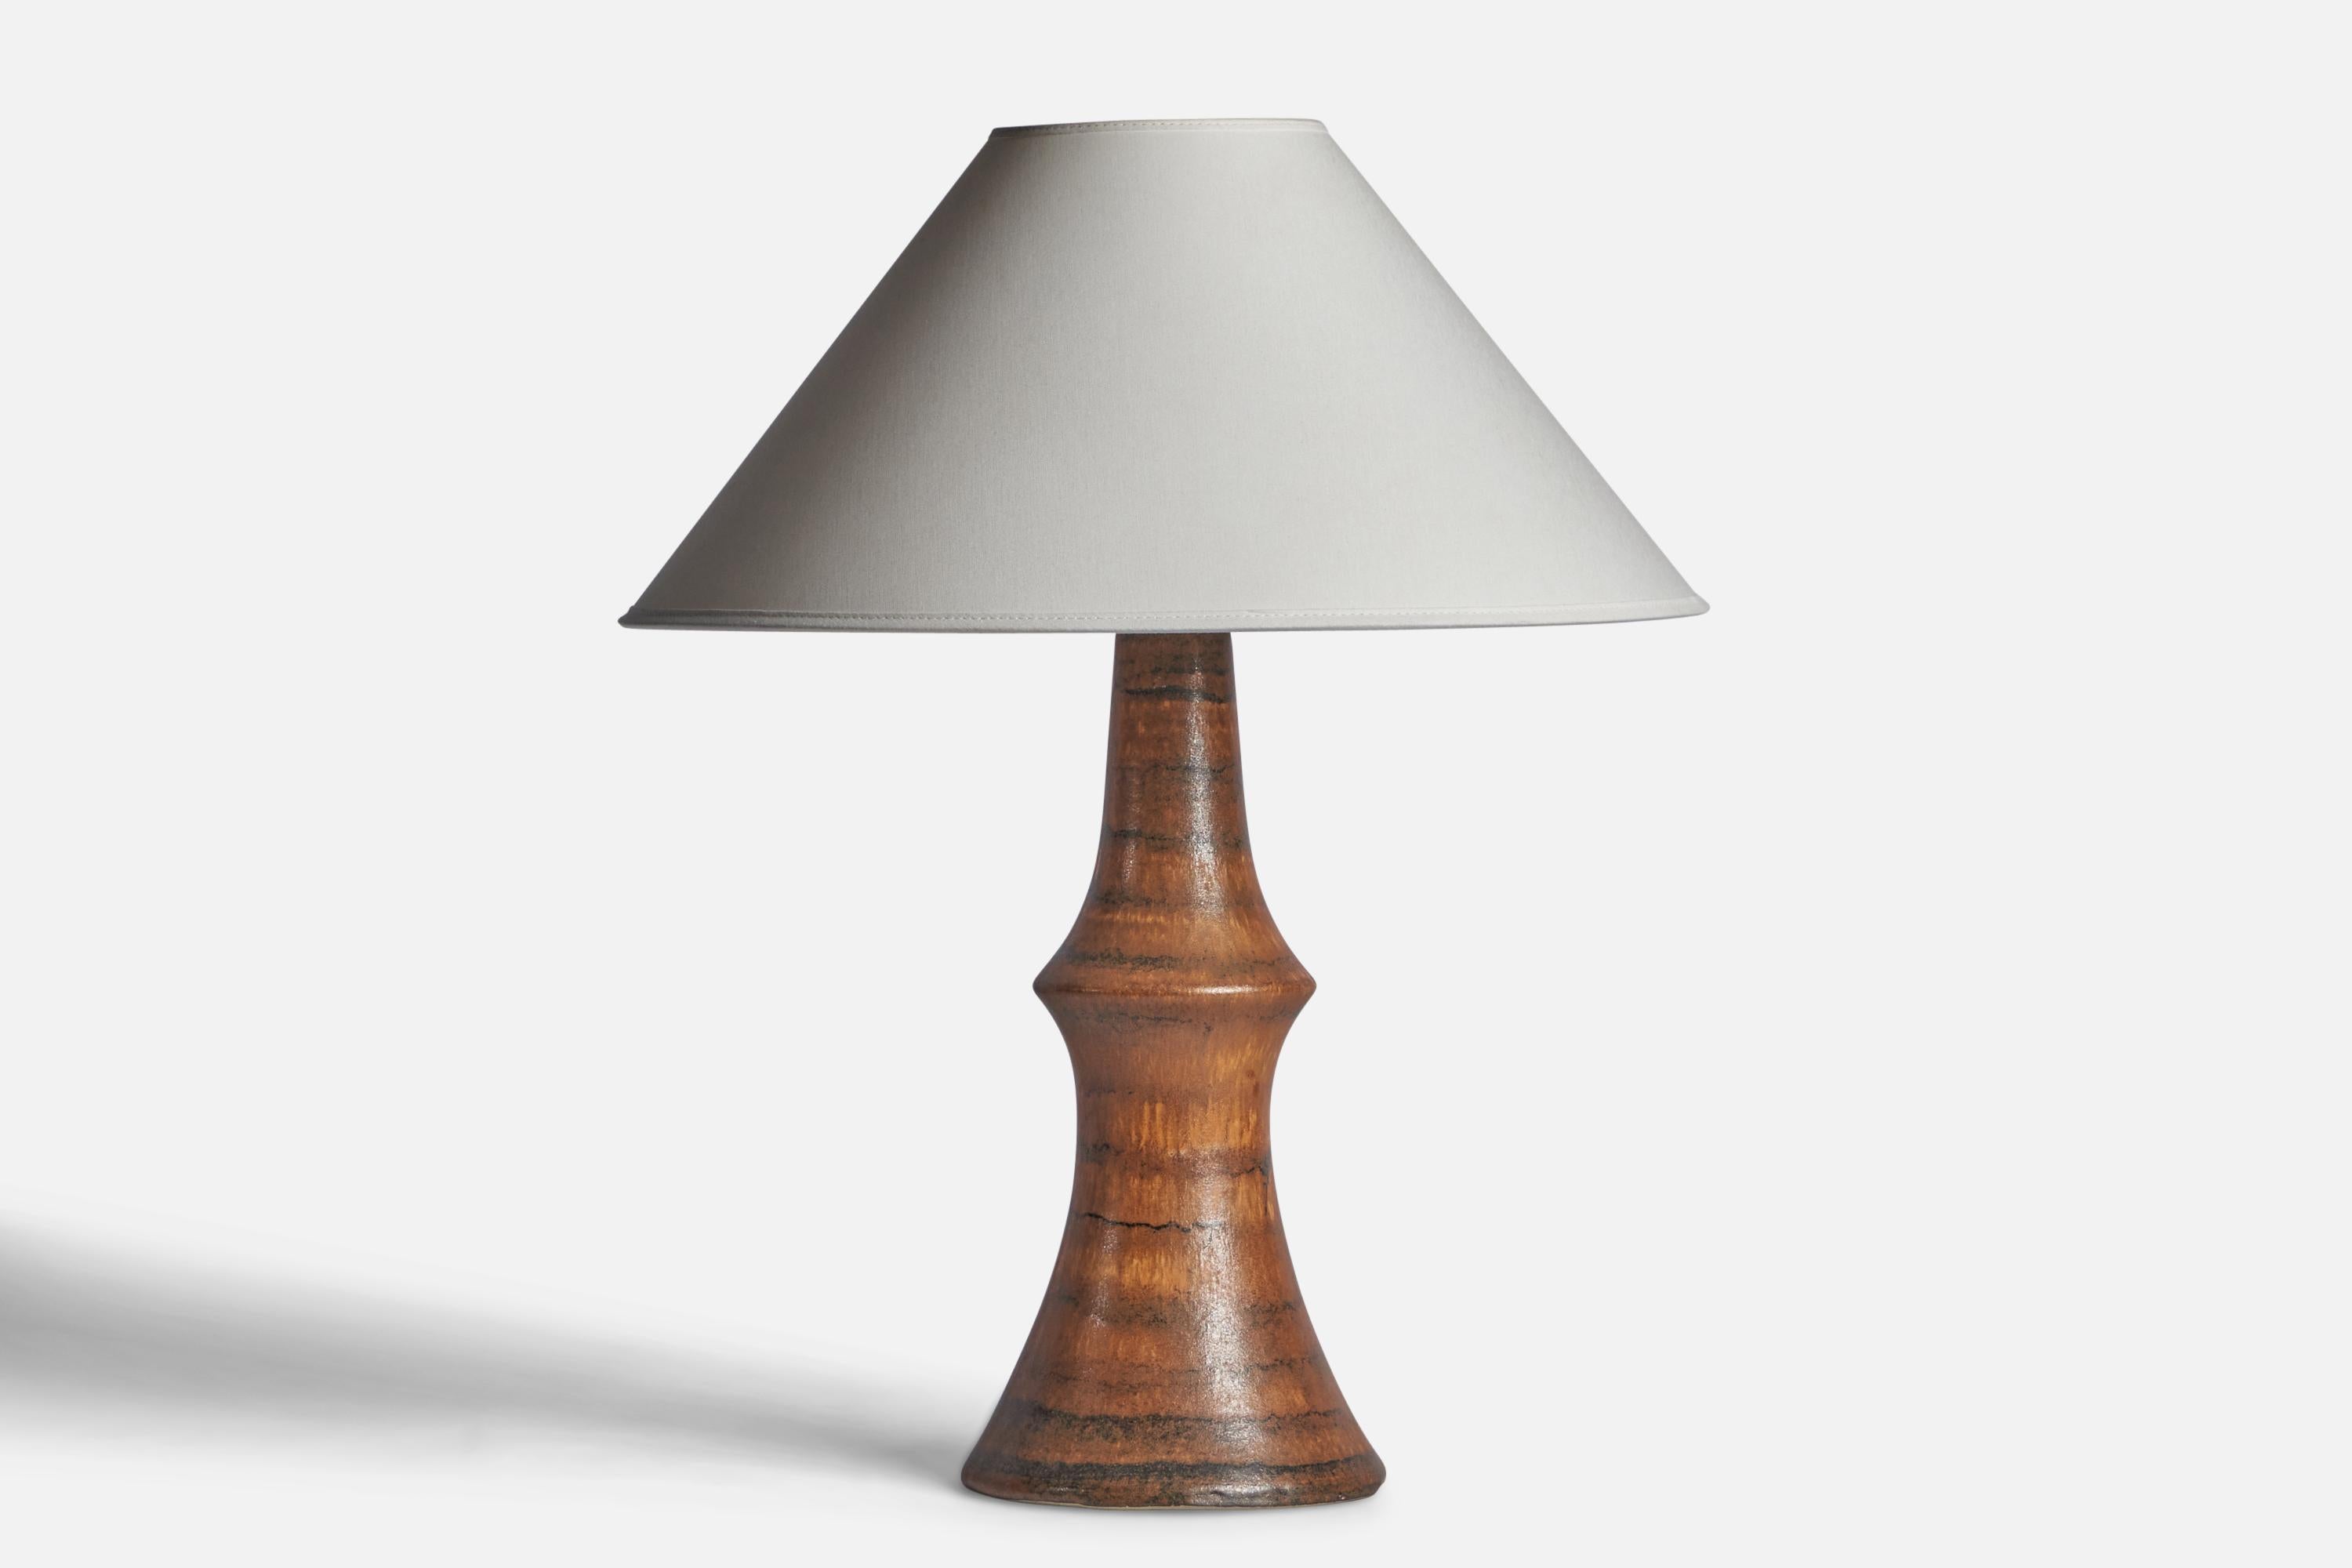 A brown-glazed stoneware table lamp designed by Bruno Karlsson and produced by Ego Stengods, Sweden, c. 1960s.

Dimensions of Lamp (inches): 15.75” H x 6.2” Diameter
Dimensions of Shade (inches): 4.5” Top Diameter x 16” Bottom Diameter x 7.25”